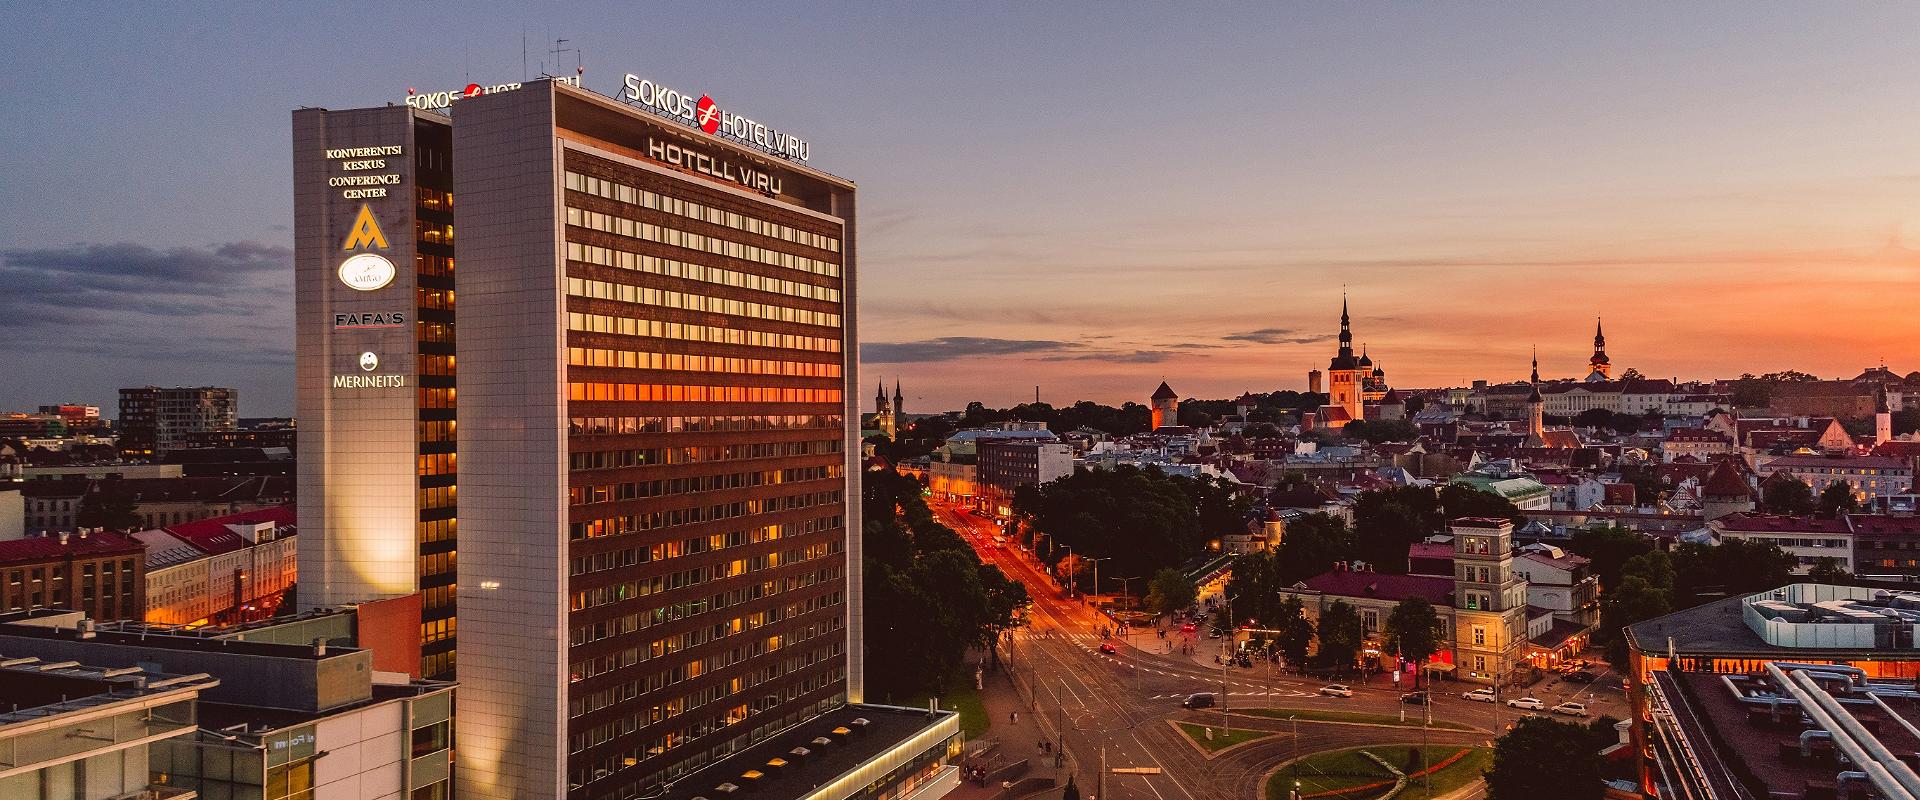 Original Sokos Hotel Viru is located in the heart of Tallinn, by the gates of the Old Town. There are many concert venues as well as commercial and en